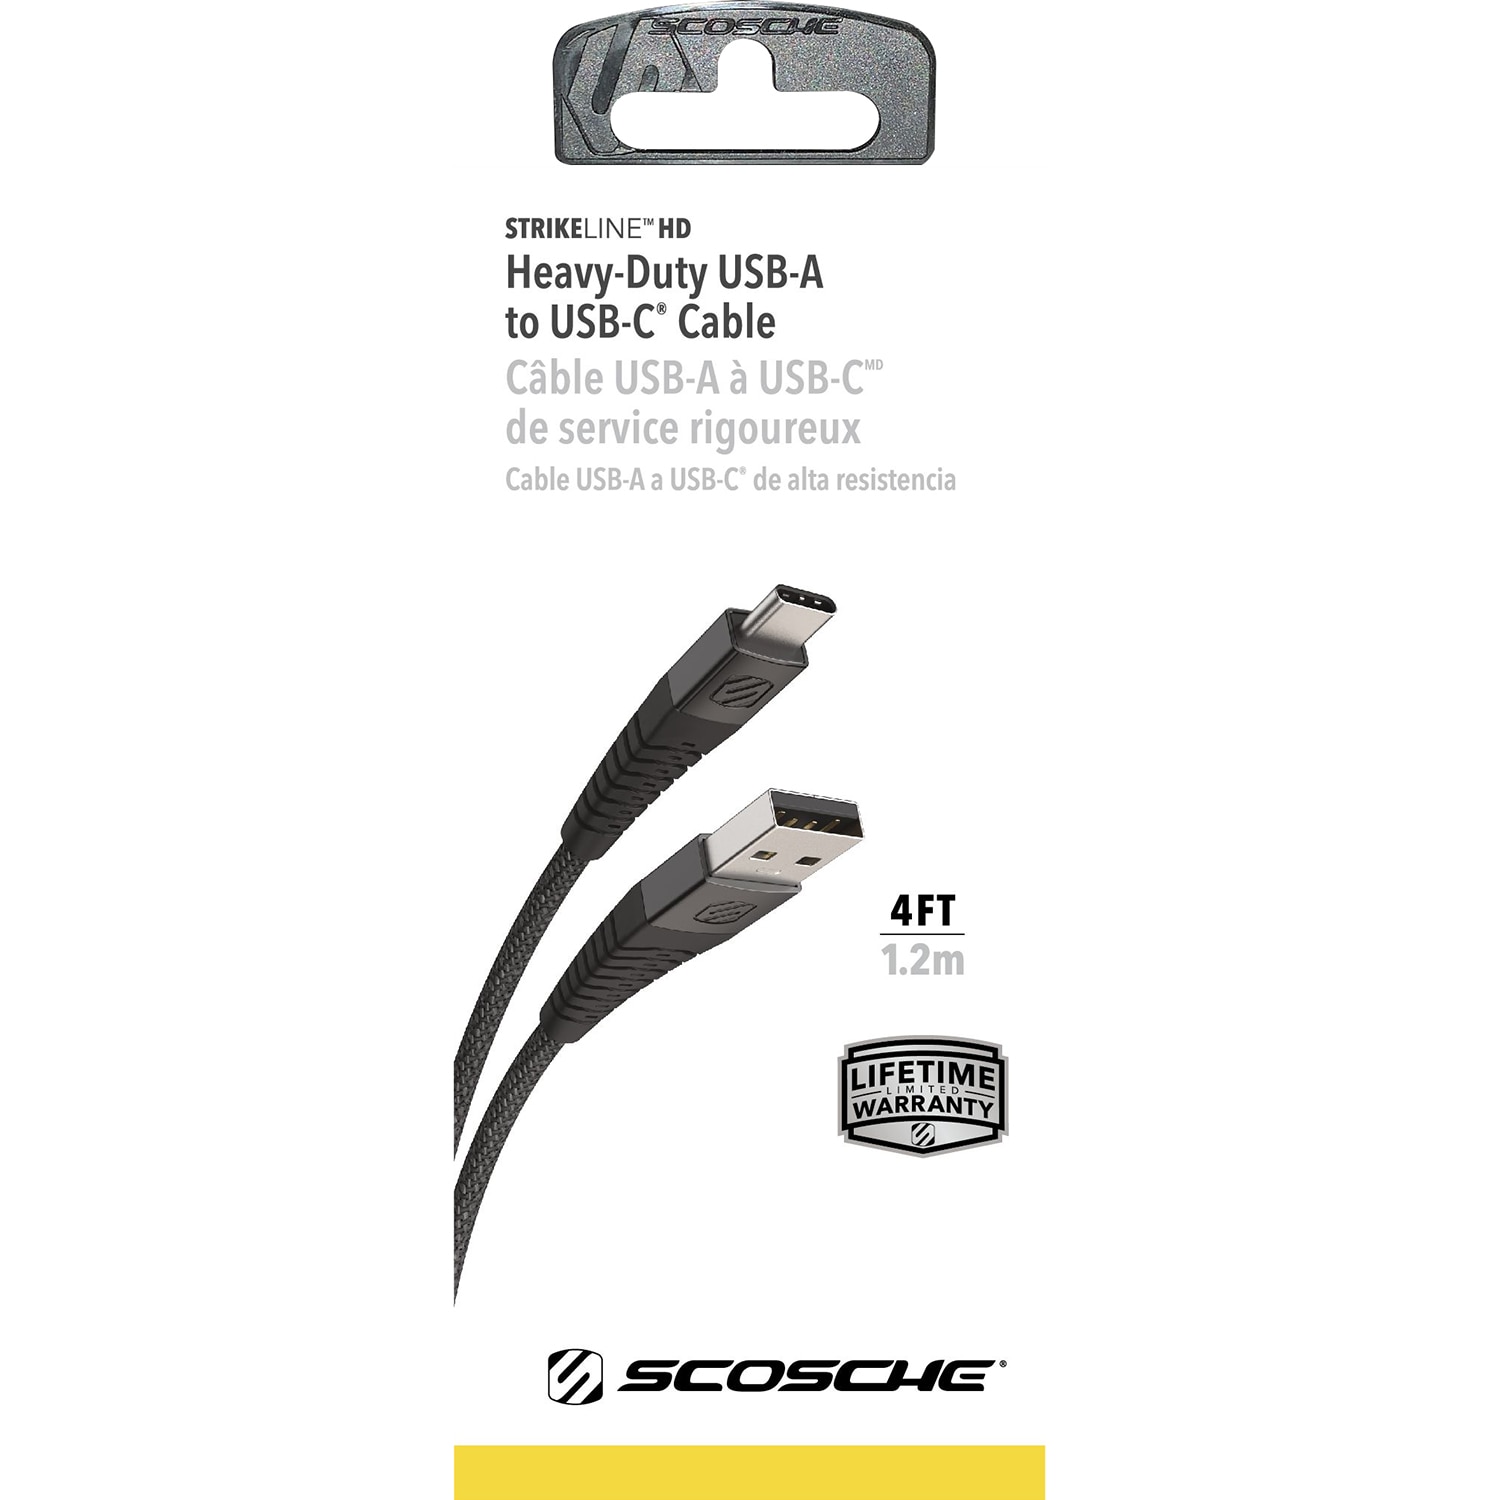 Scosche Strikeline Heavy Duty Premium USB Charge and Sync Cable USB-A to USB-C 4ft